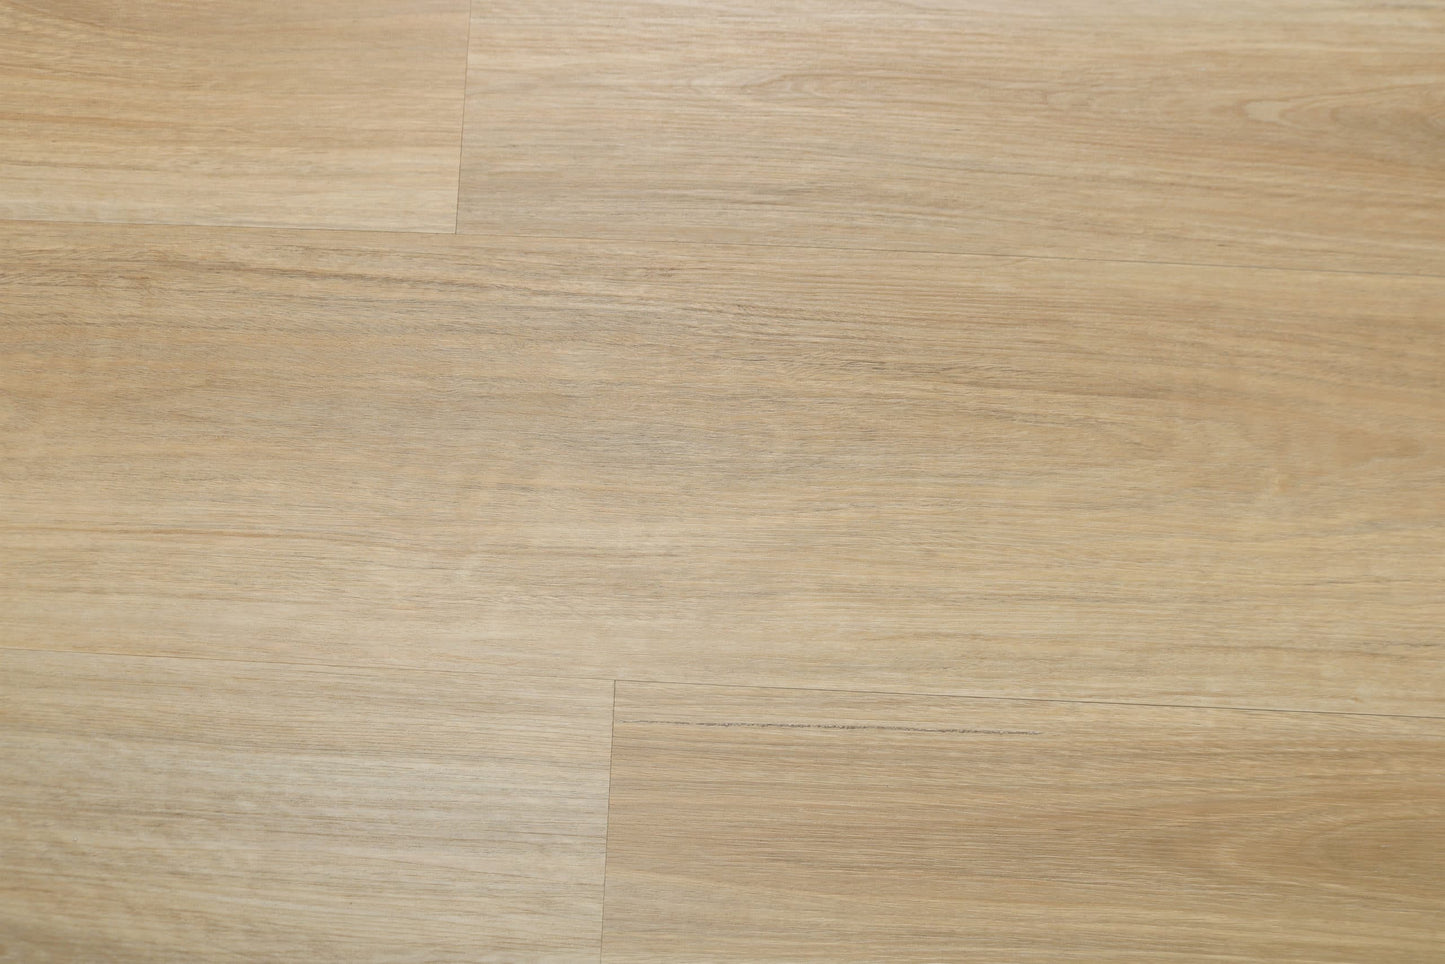 DION 02 - BRIGHT SPOTTED GUM